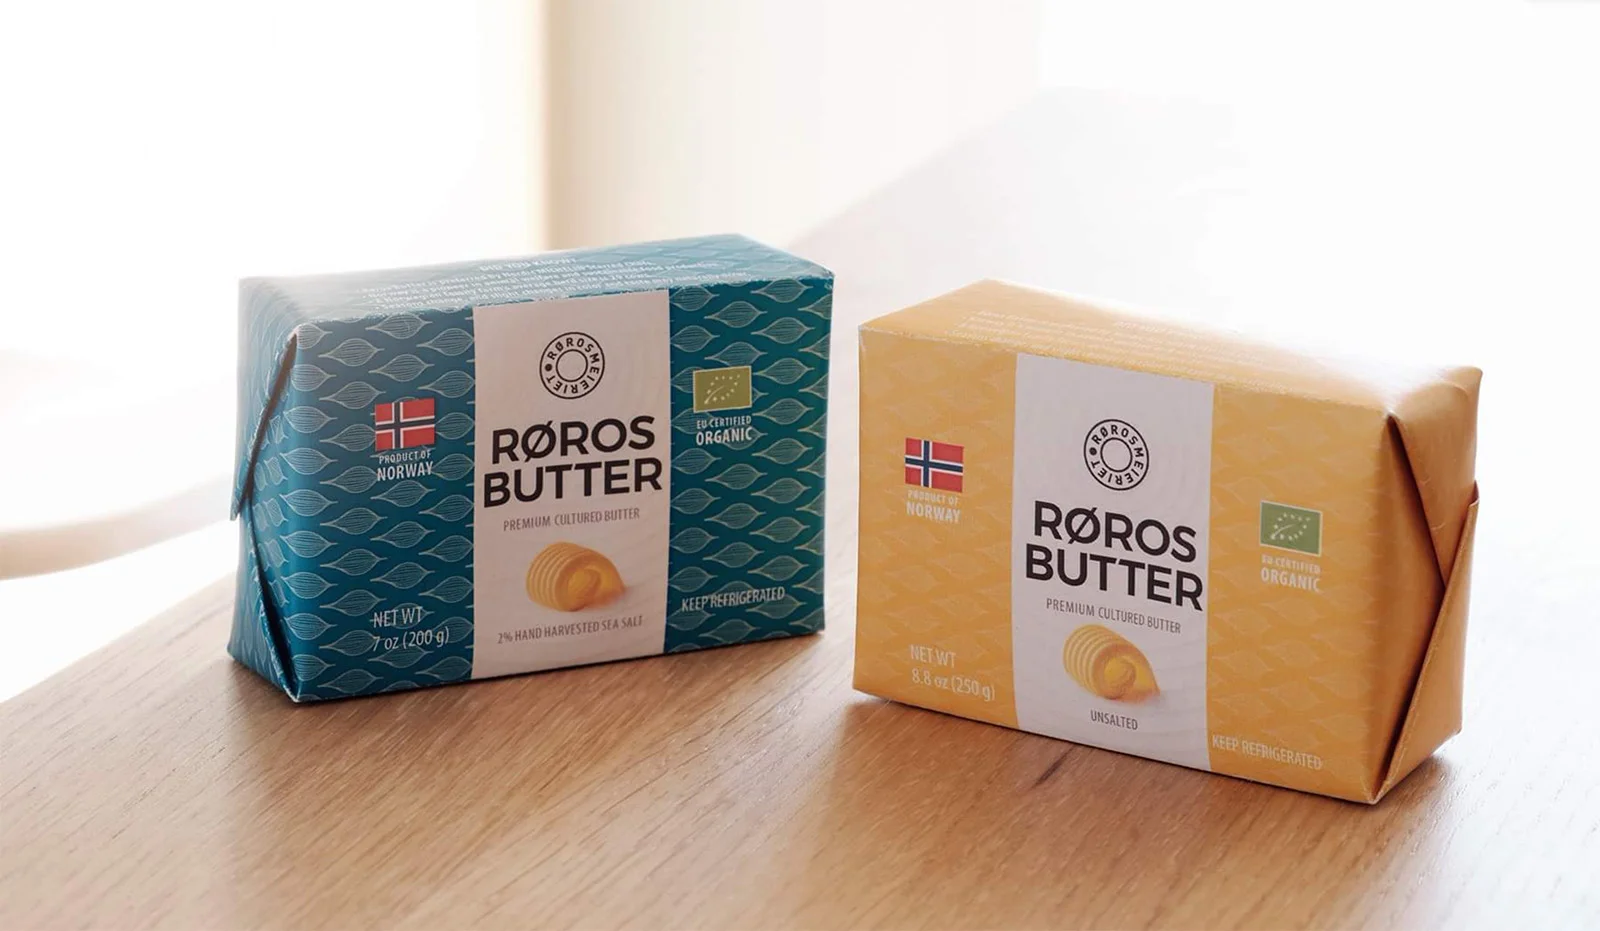 Røros Butter in its new American packaging